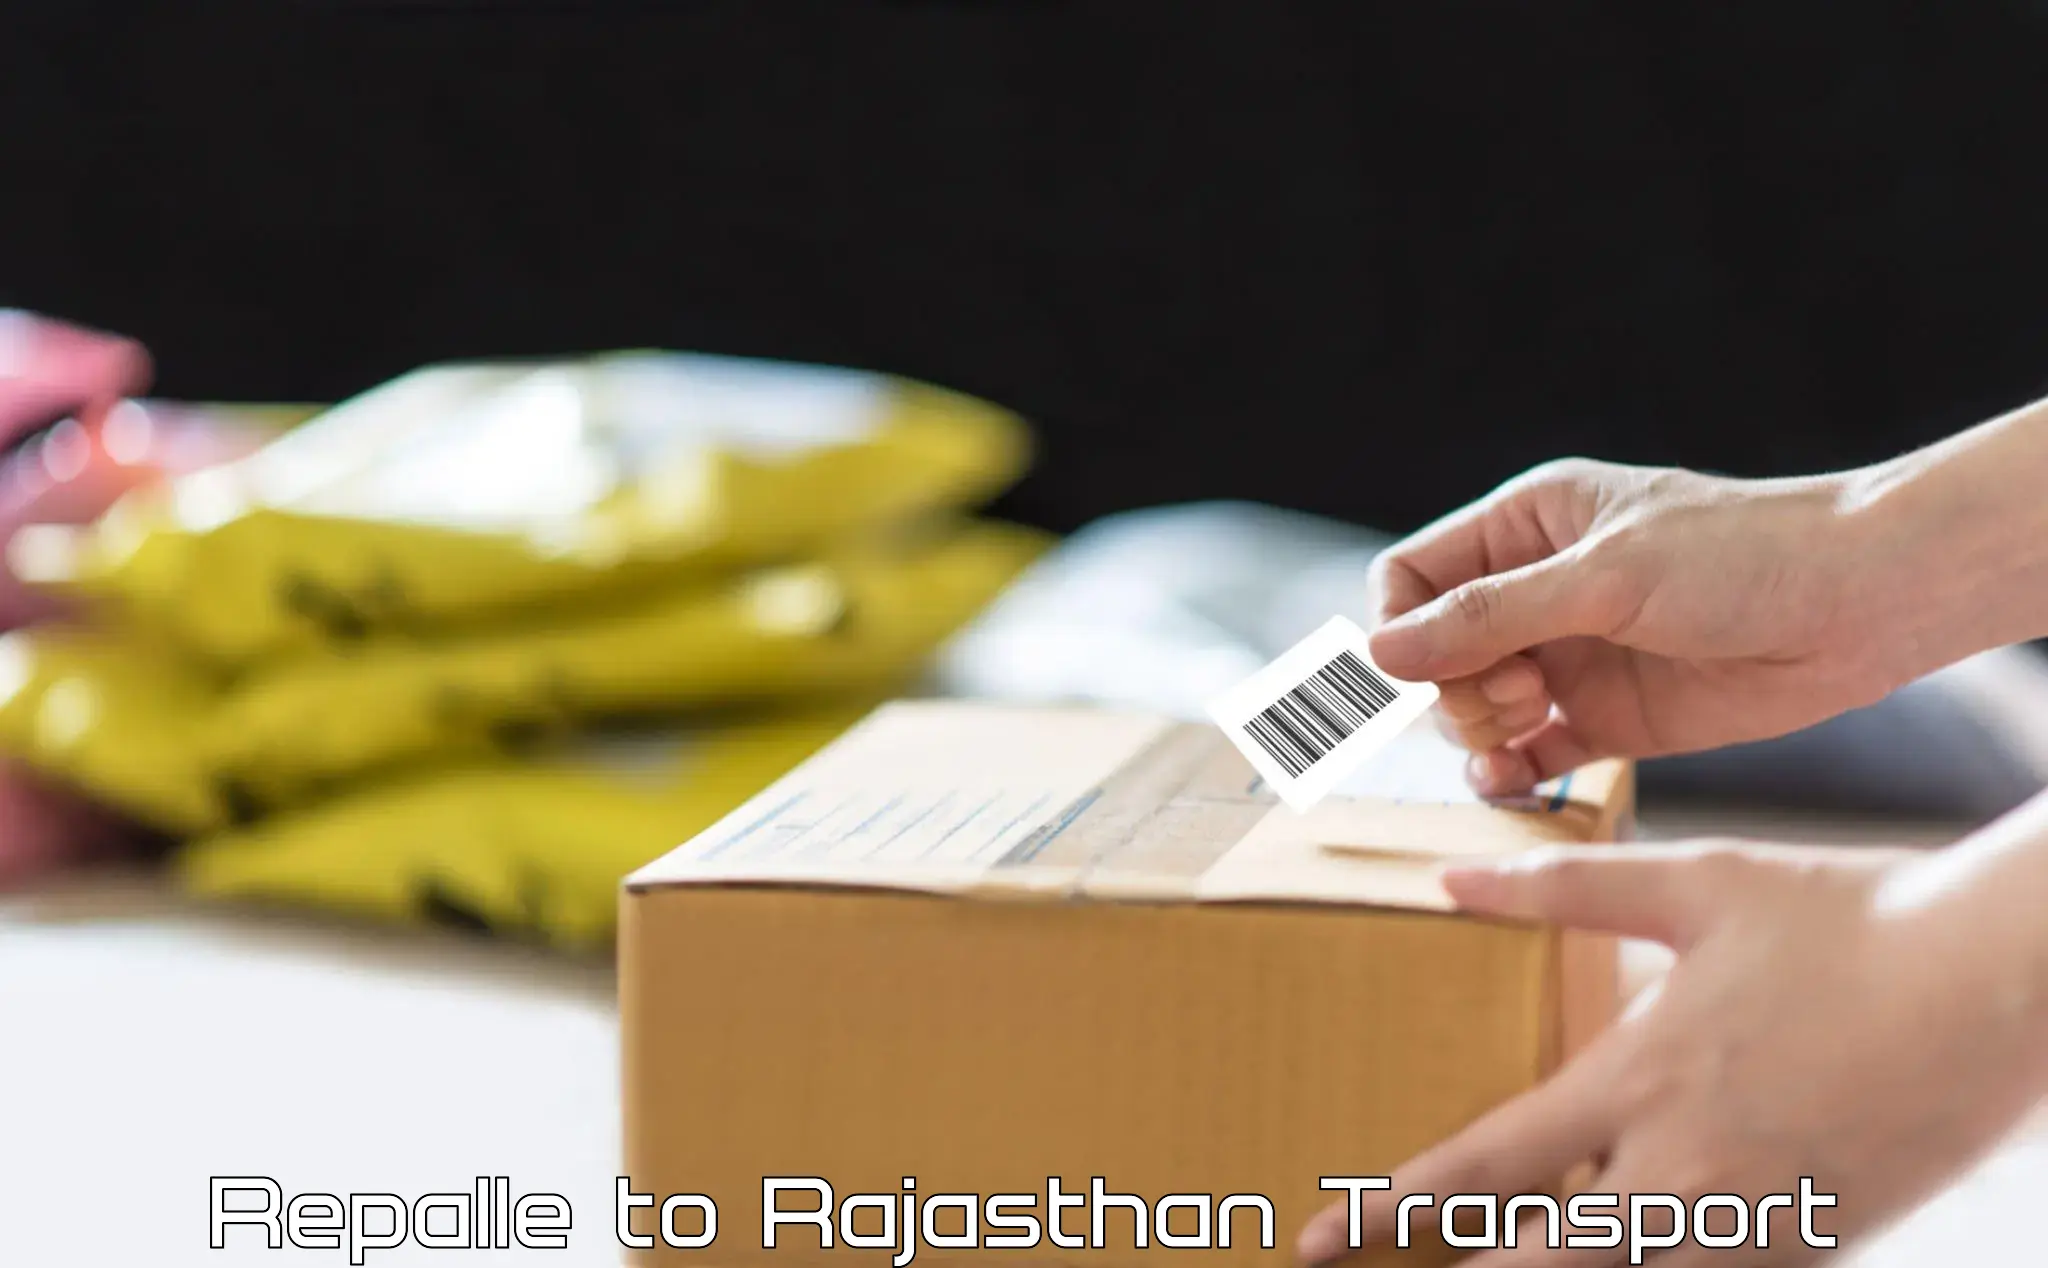 Online transport service Repalle to Rajasthan